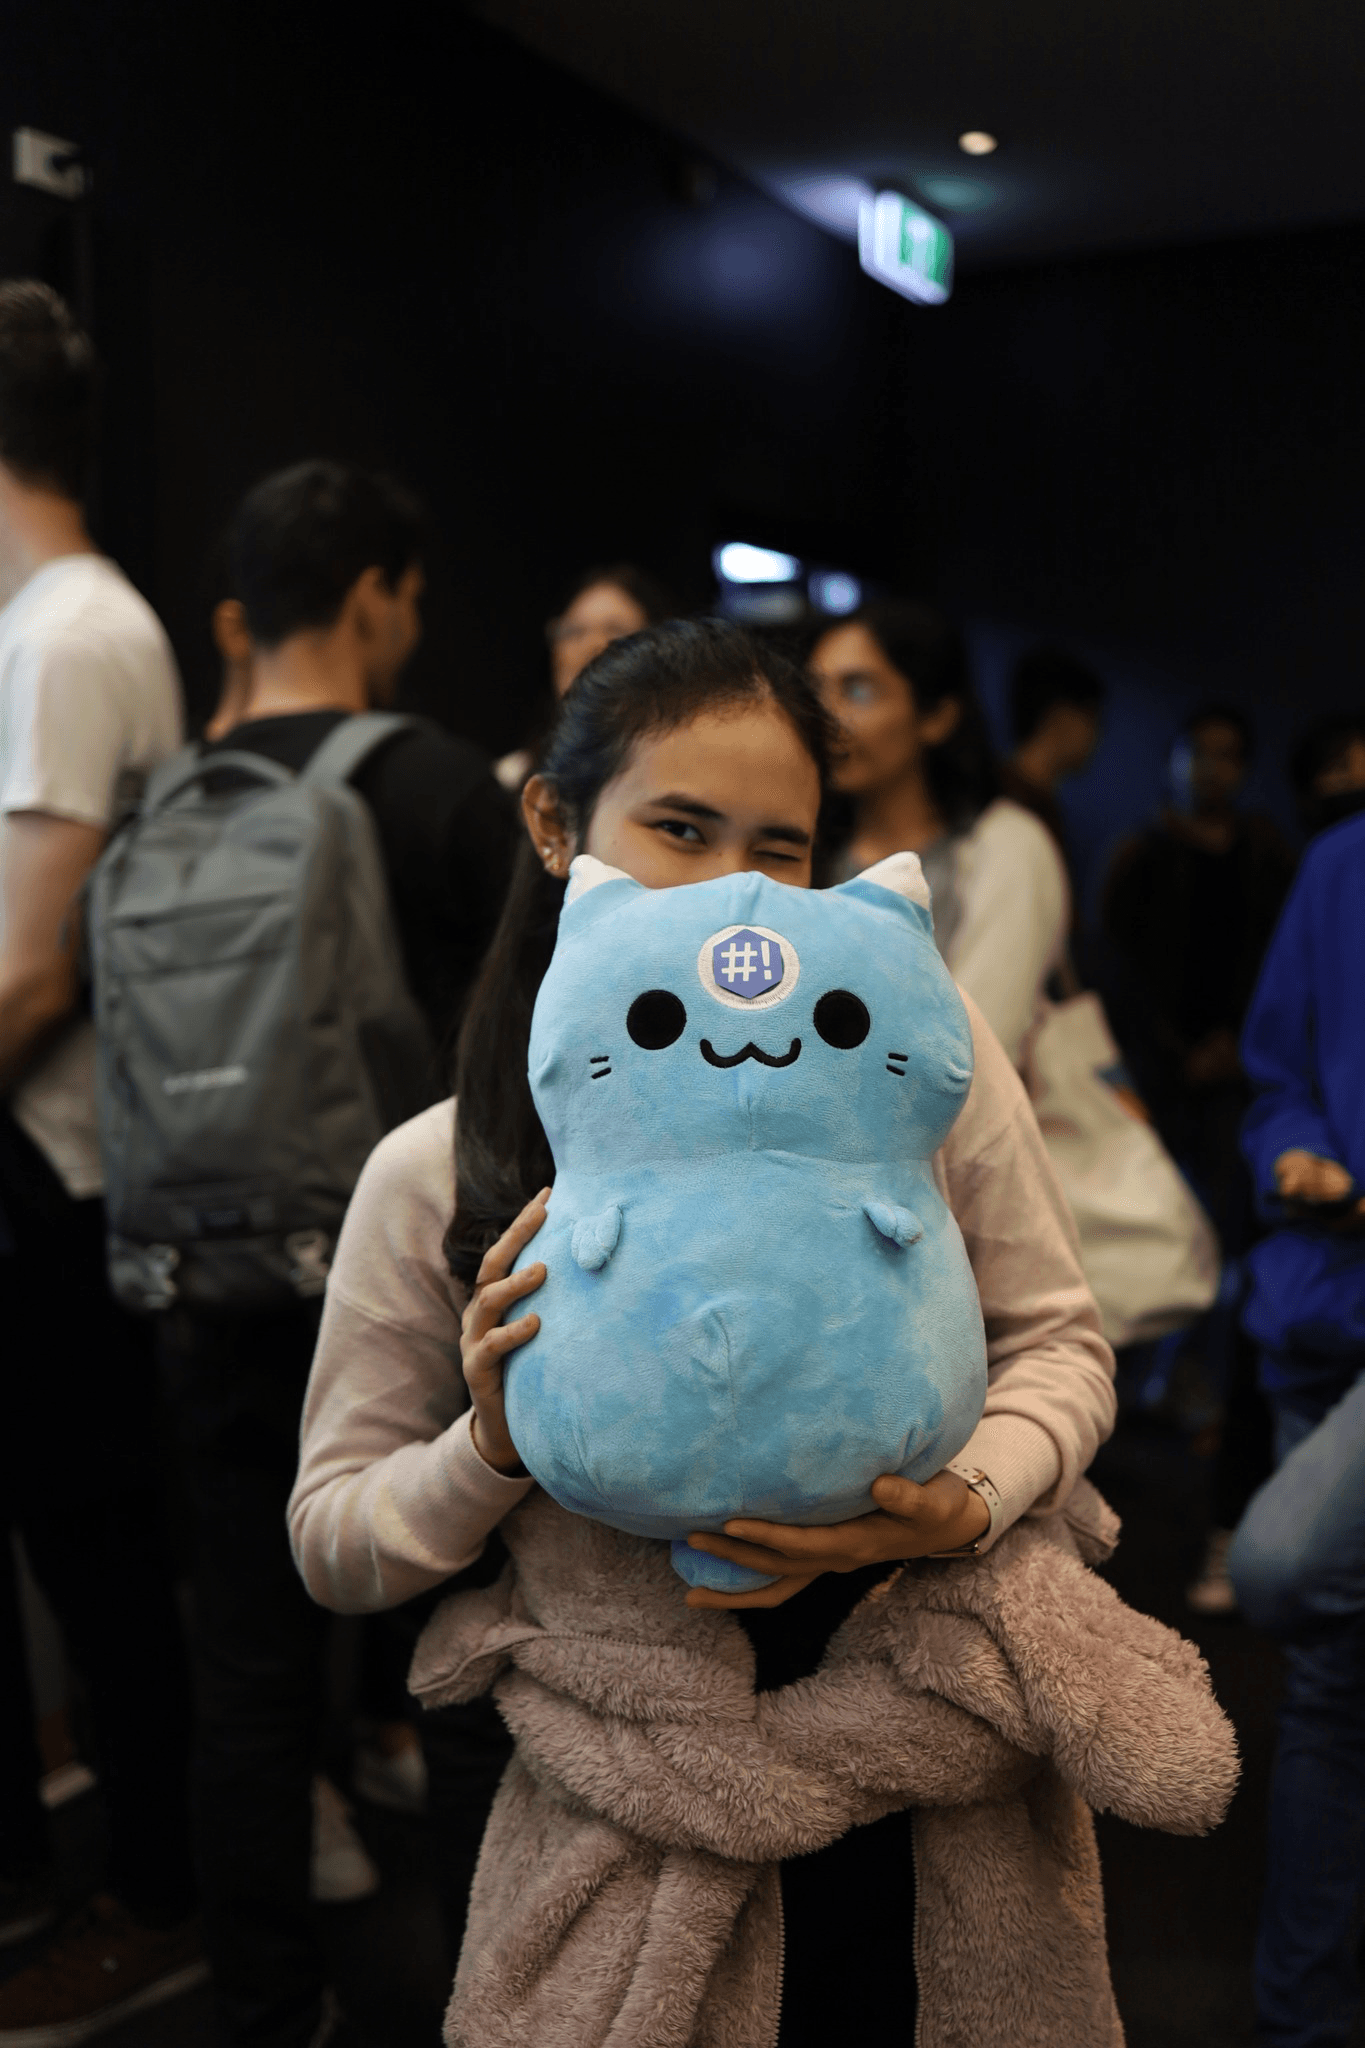 Student holding a Syncs plush toy